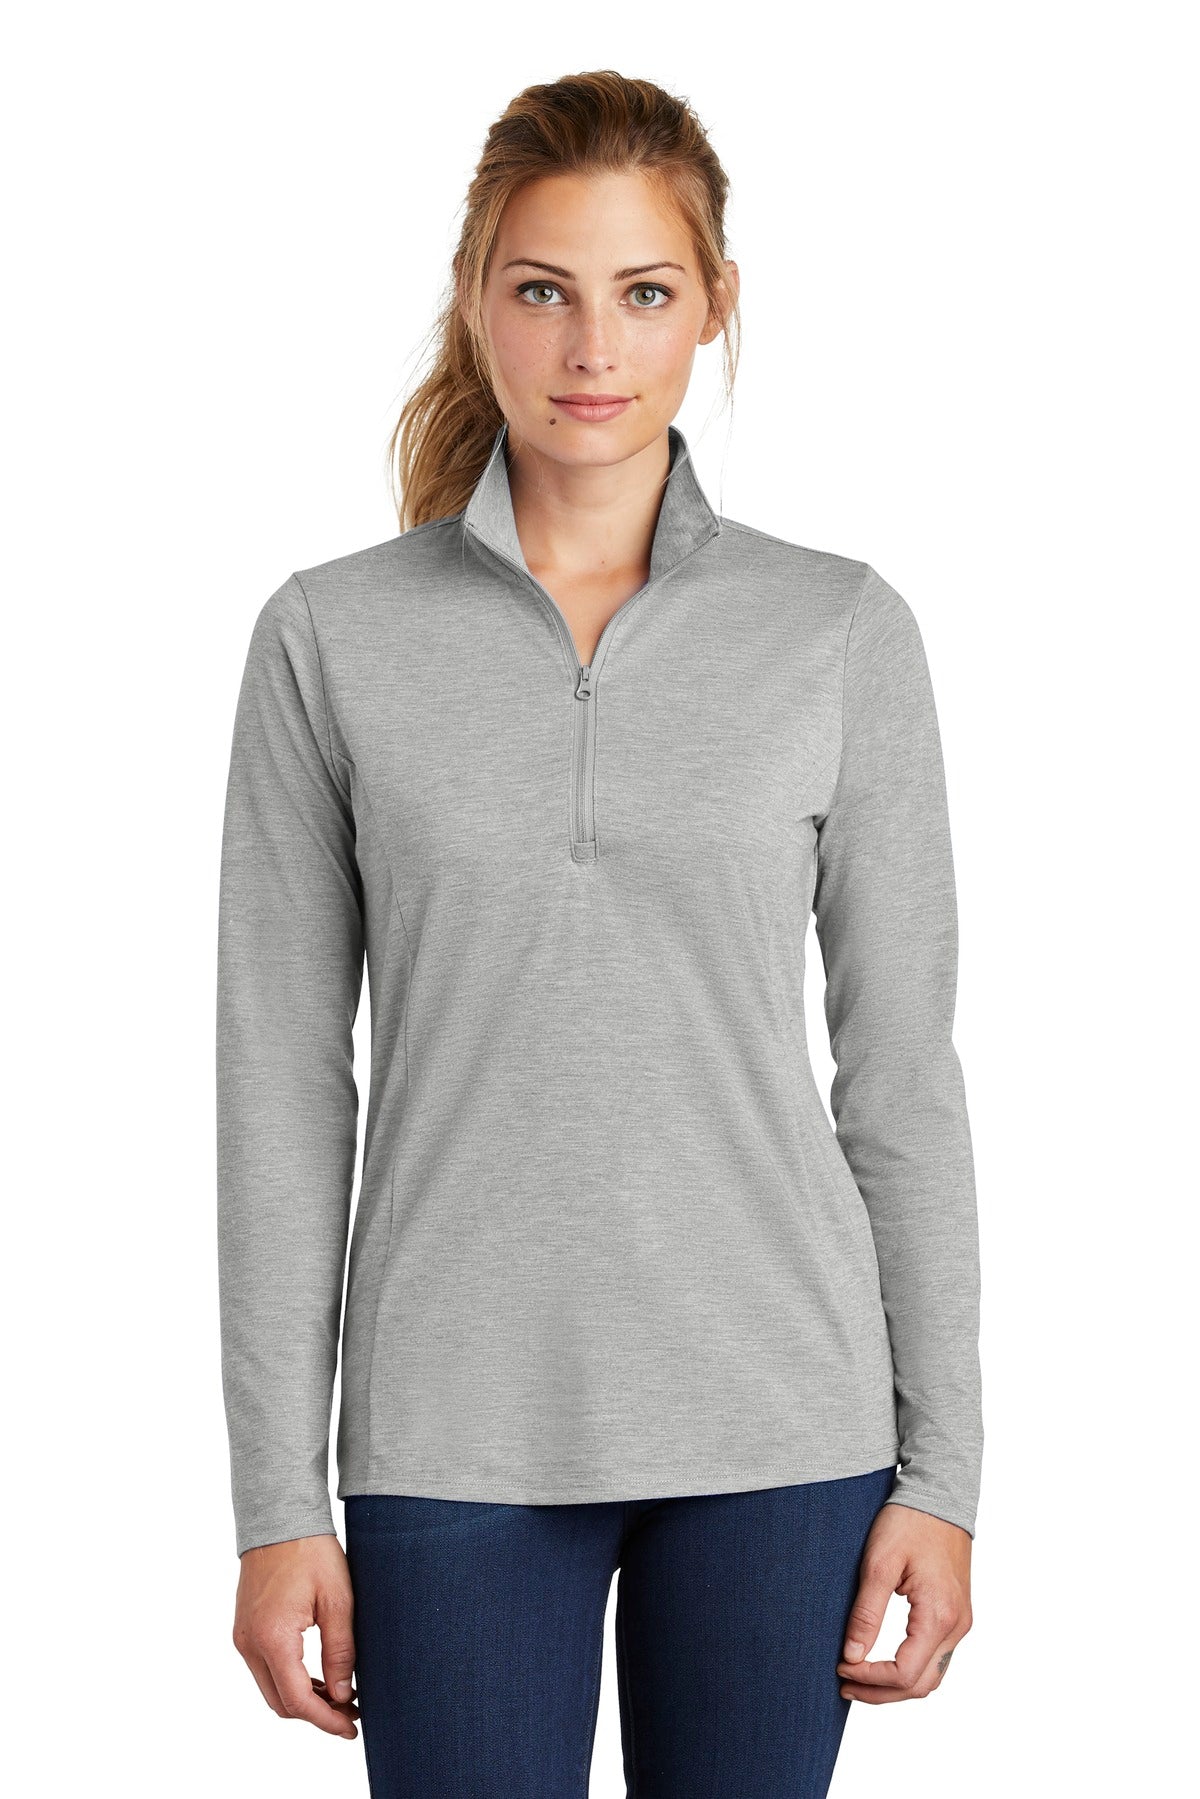 Ladies PosiCharge ® Tri-Blend Wicking 1/4-Zip Pullover. LST407